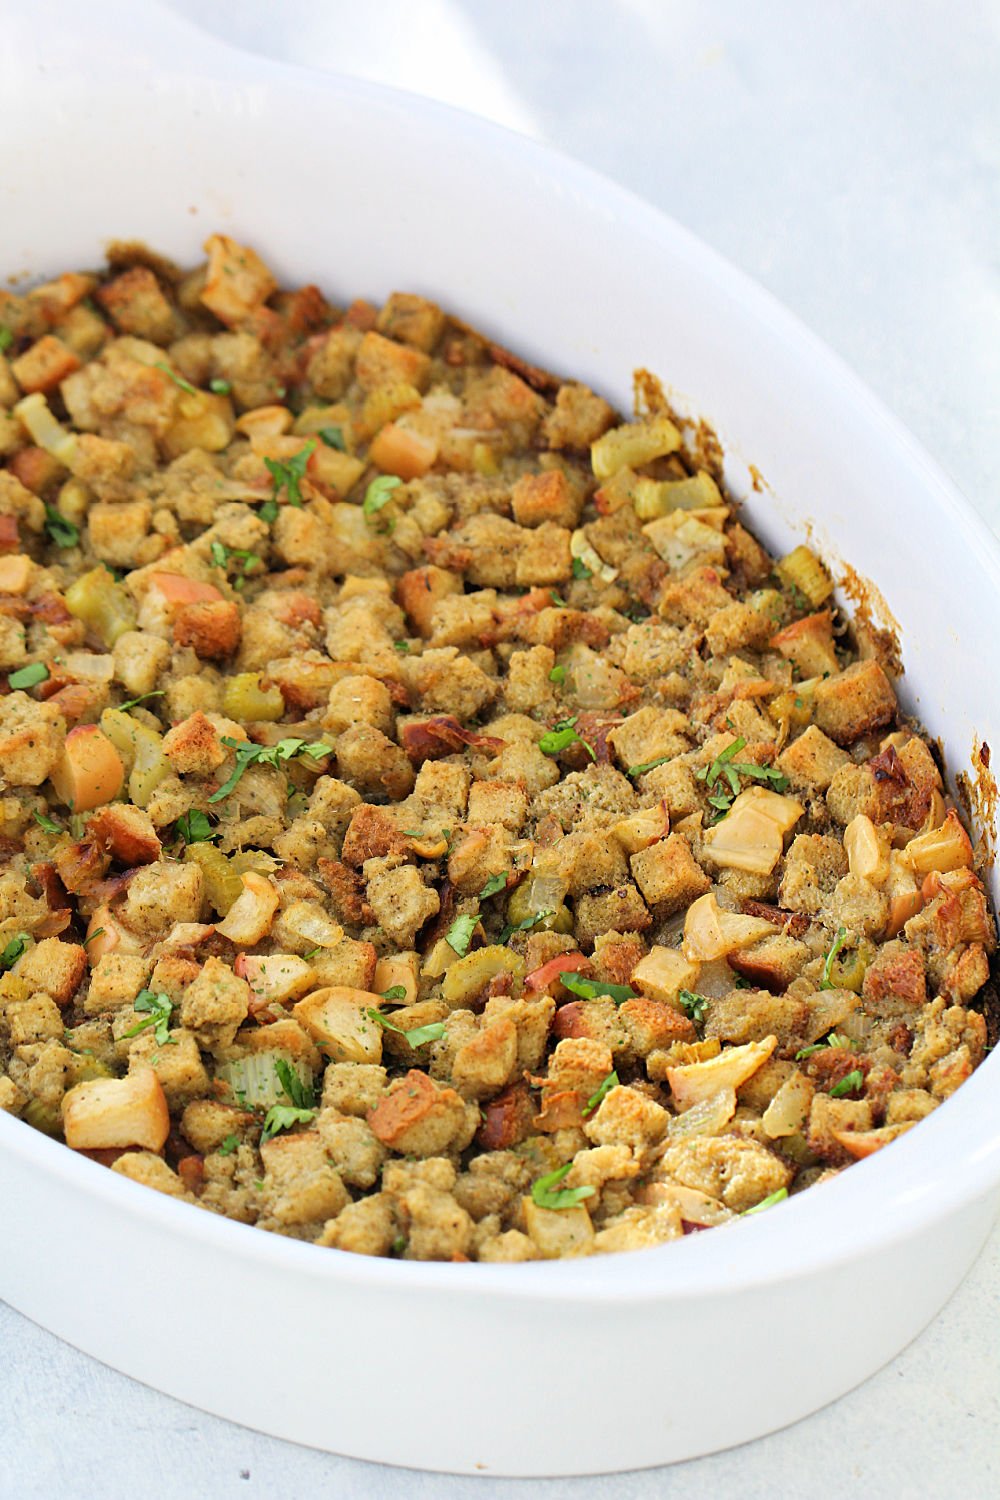 Apple, Onion, and Celery Stuffing